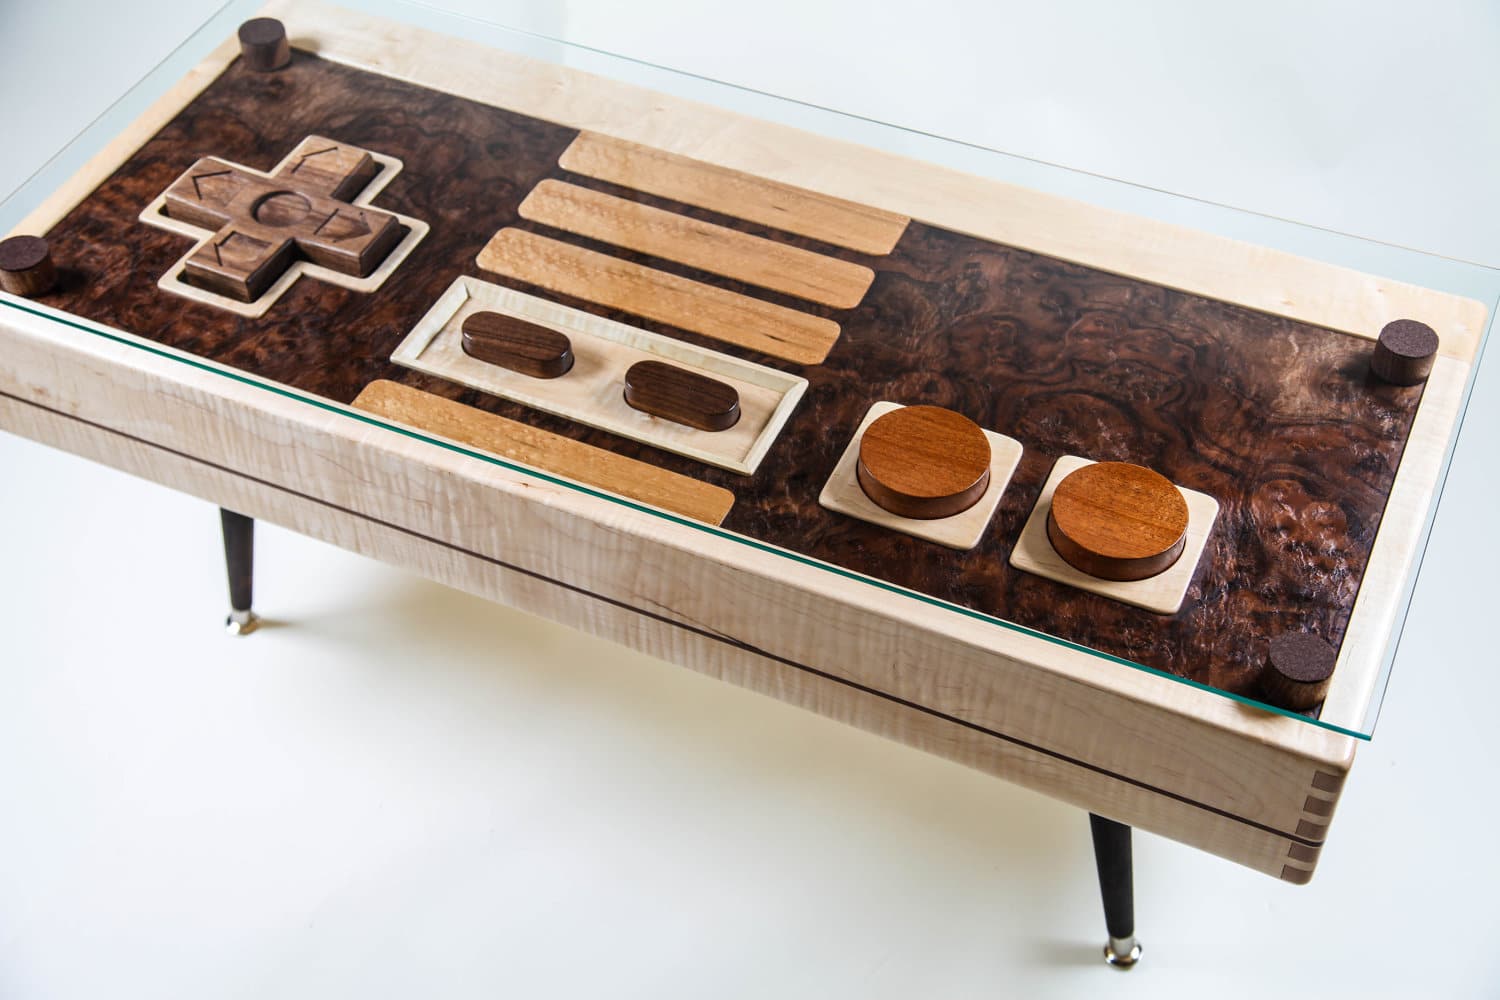 Functional Wooden NES Controller Coffee Table Available For $3,700